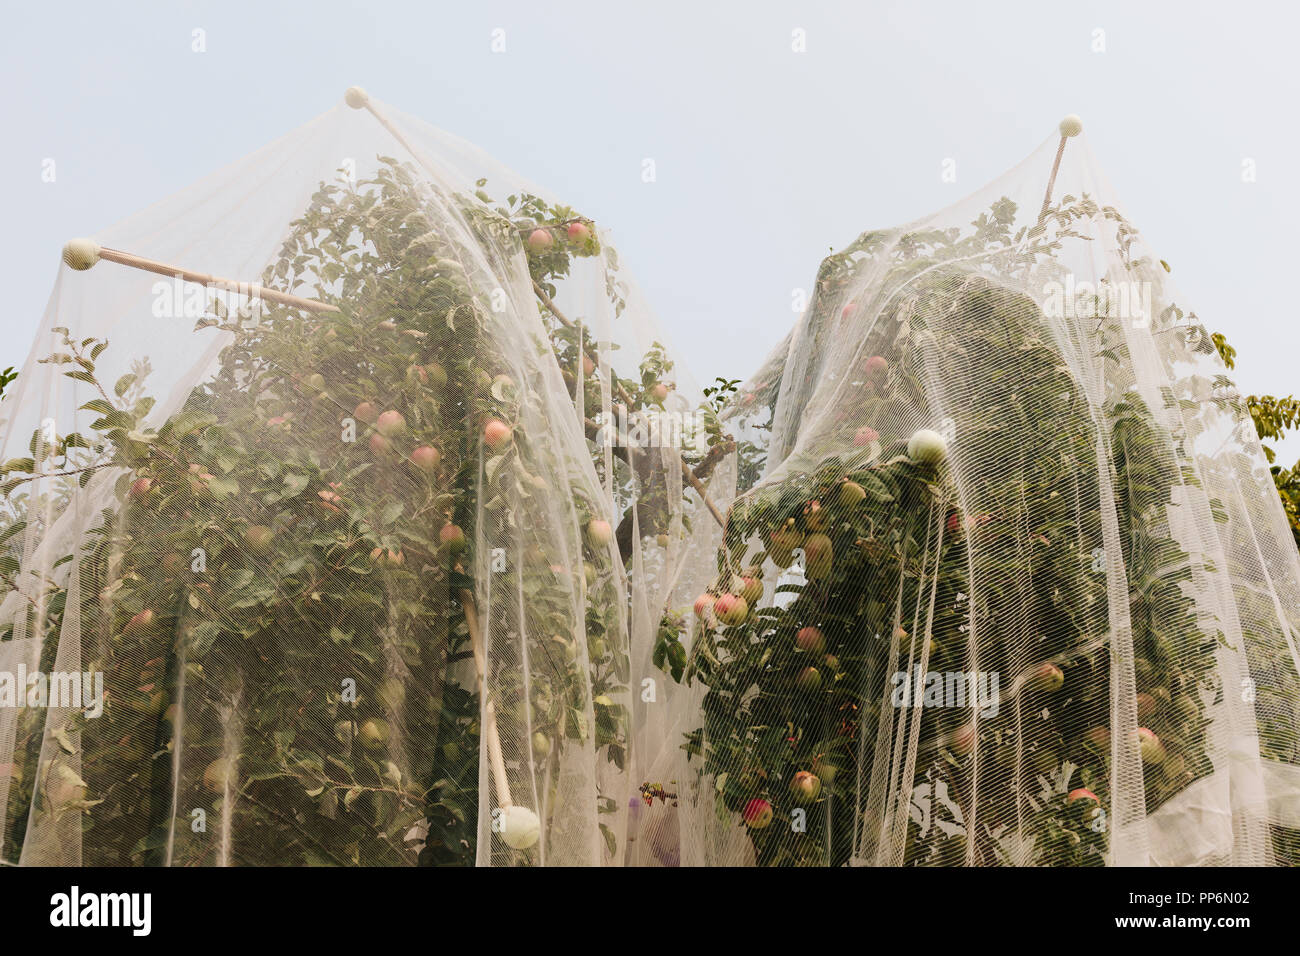 Protective mesh fabric covering apple trees bearing young fruit in summer in a commercial orchard. Pesticide-free farming and food production. Stock Photo